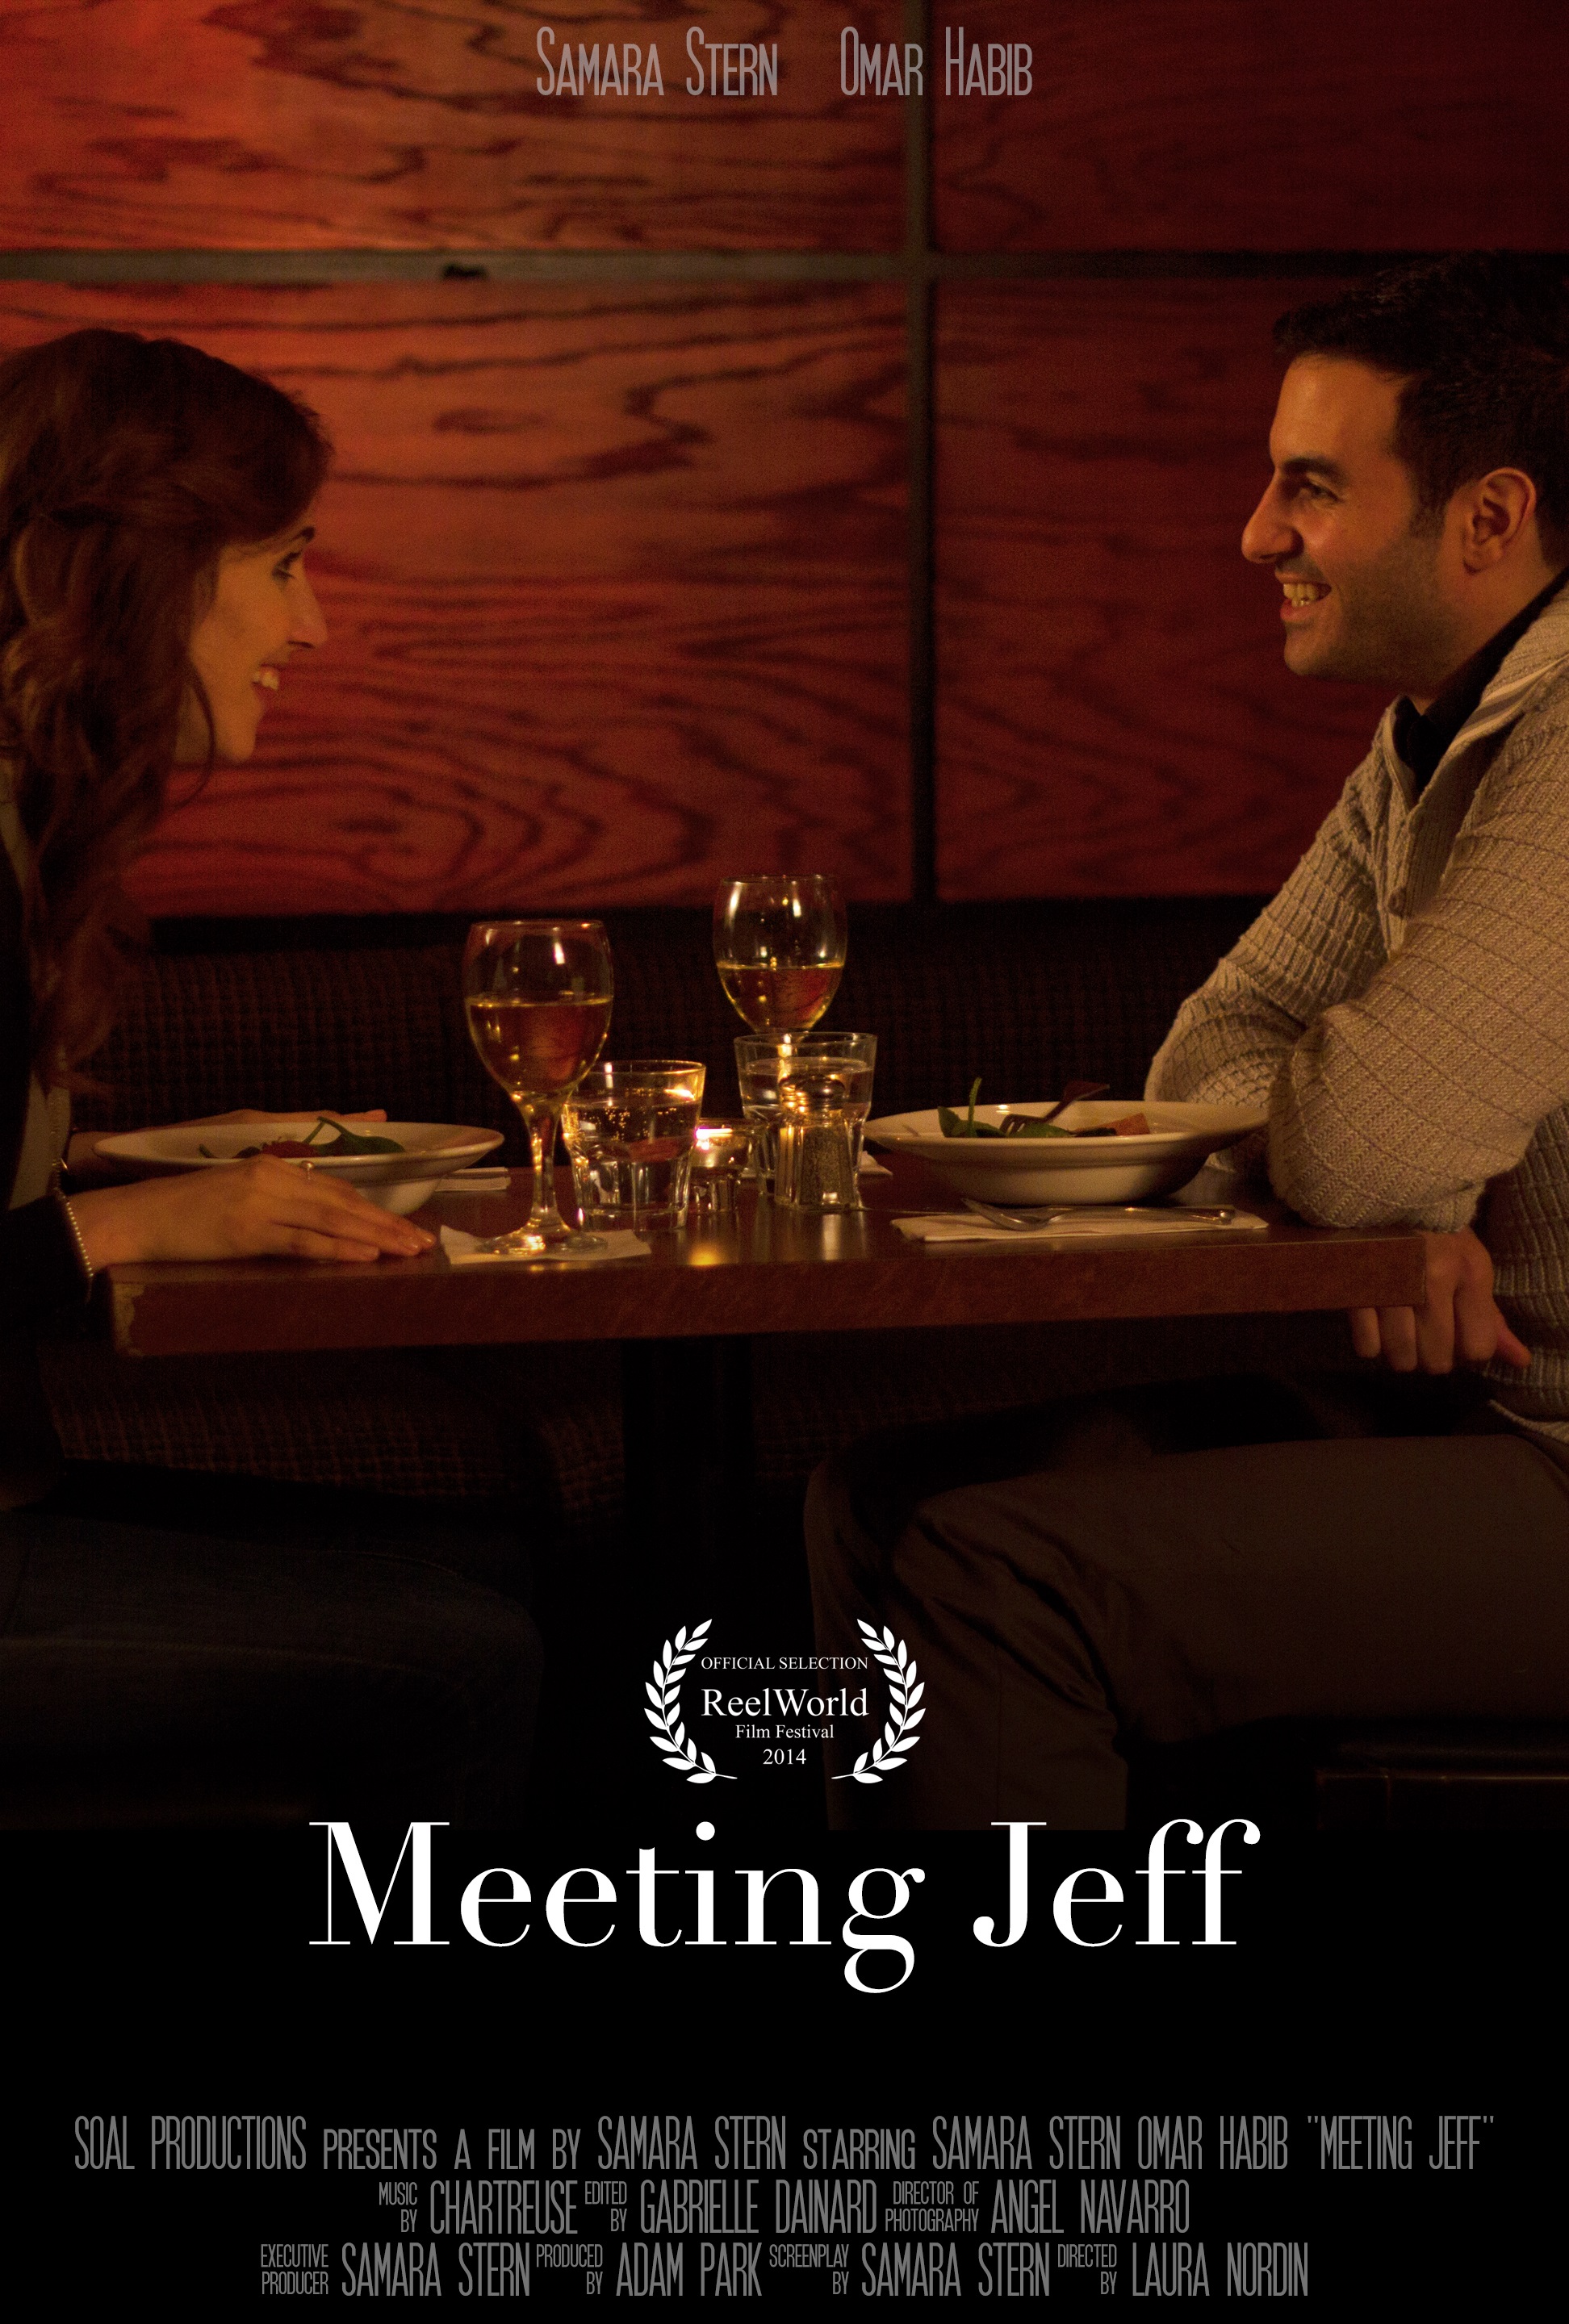 Movie poster for MEETING JEFF, designed by Zachary Richman